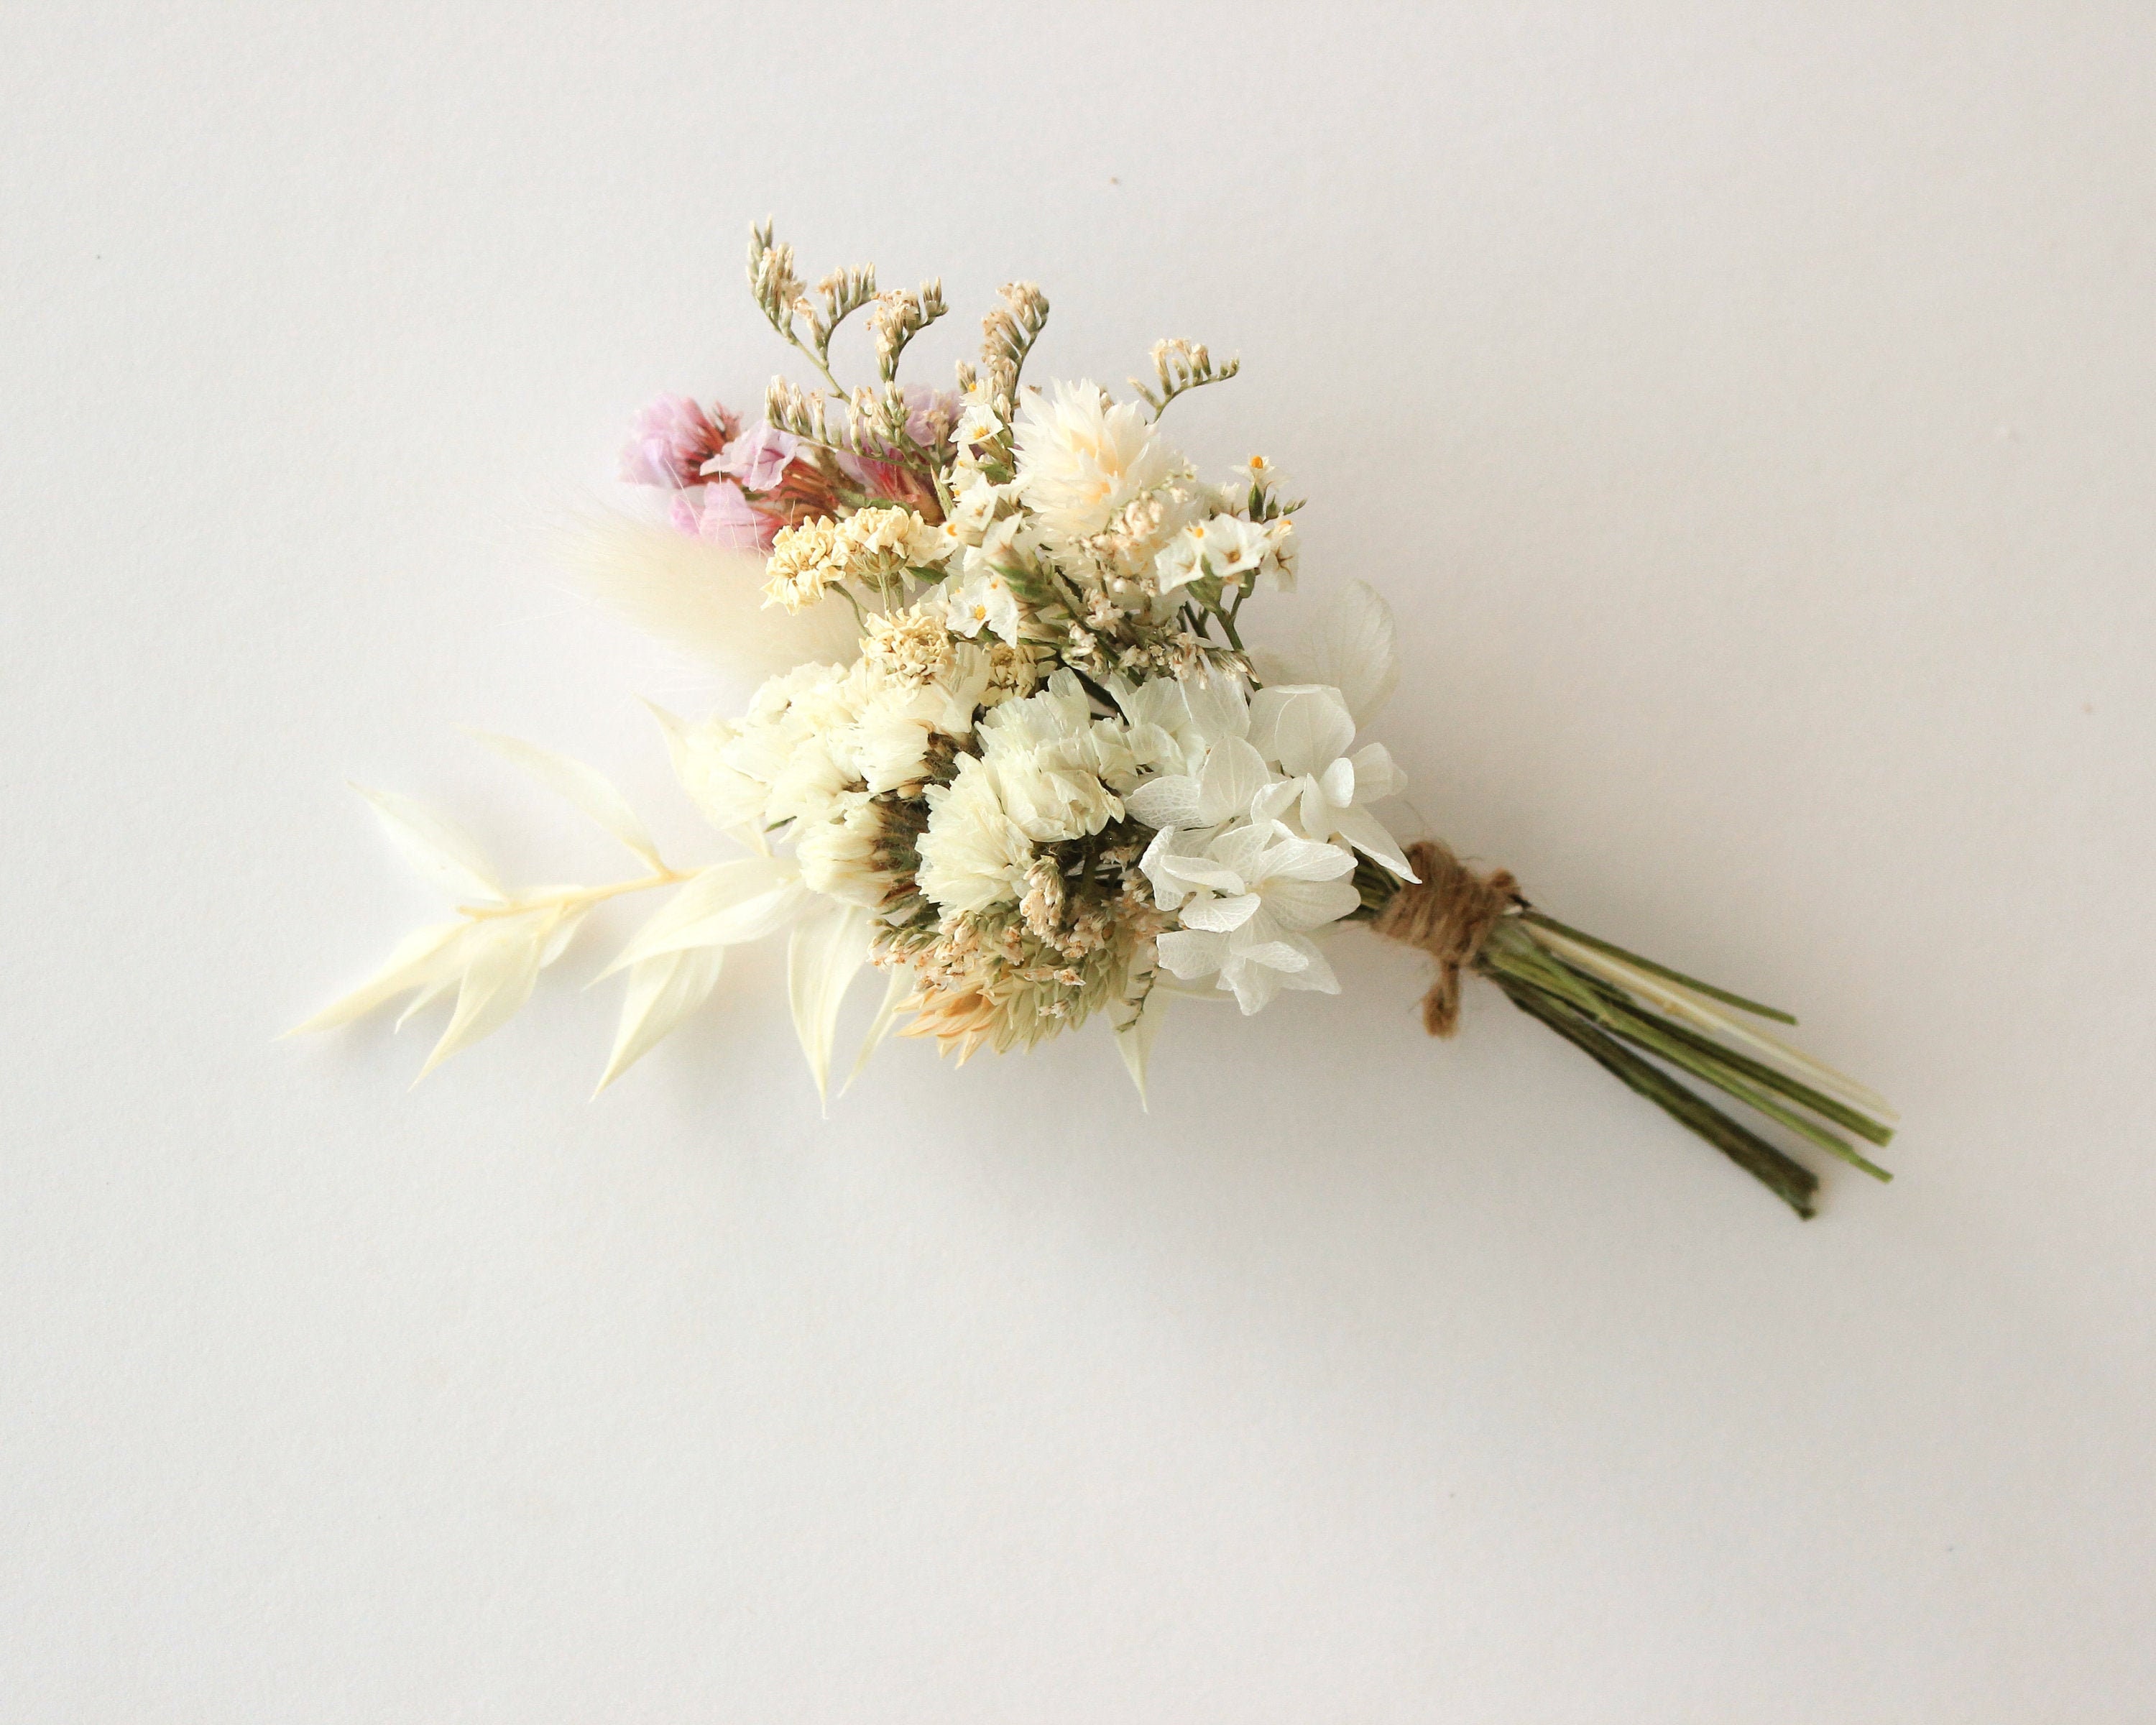 WEDDING FLOWERS BUTTONHOLE CORSAGE GROOM MOTHER OF BRIDE VINTAGE PINK DRIED GYP 